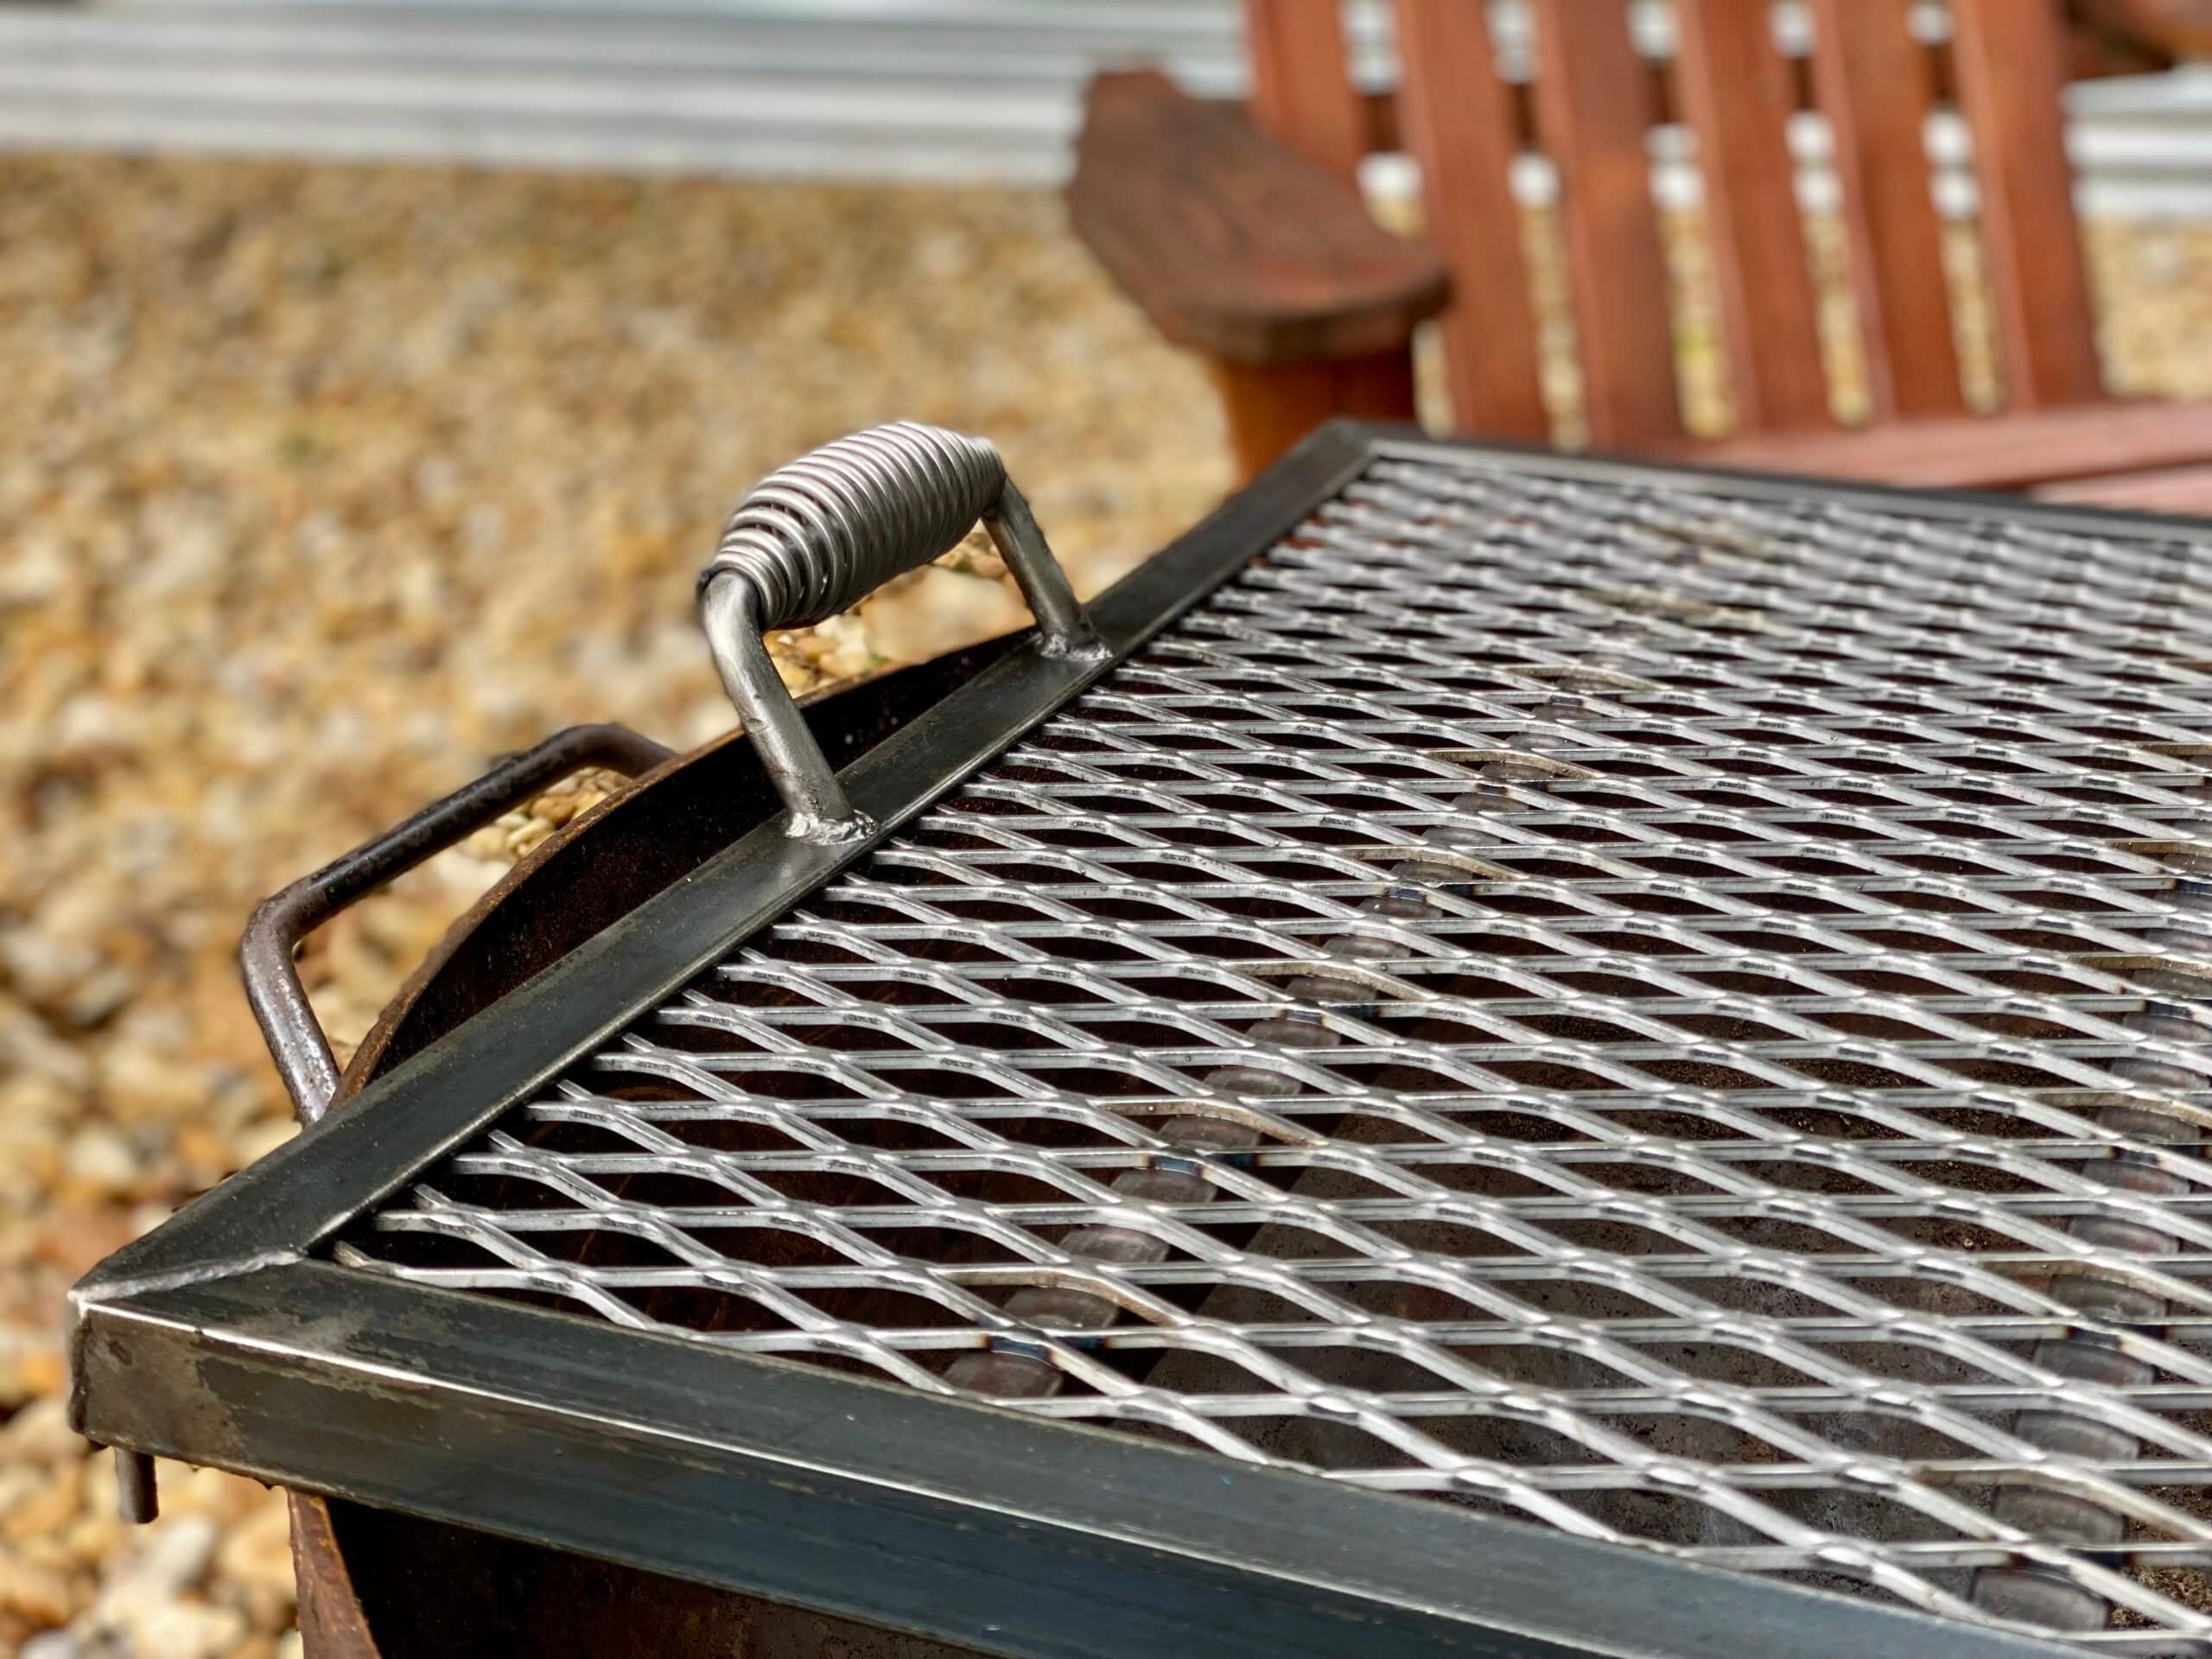 42 Fire Pit Cooking Grate Inch, Cooking Grates For Outdoor Fire Pits